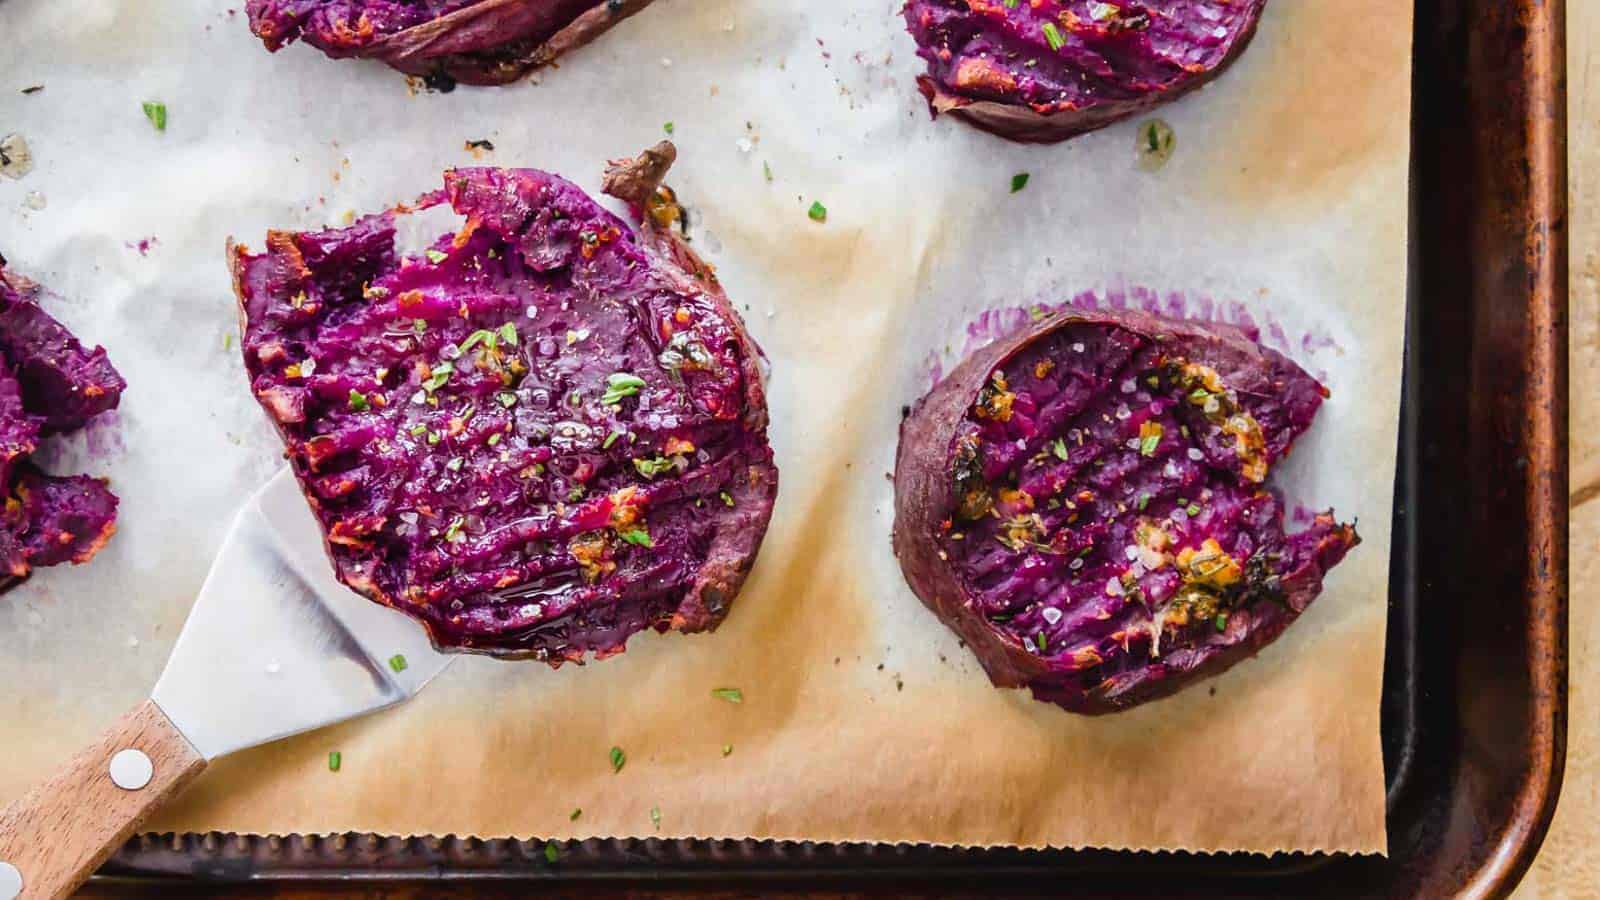 Smashed roasted purple sweet potatoes on parchment paper lined baking sheet.